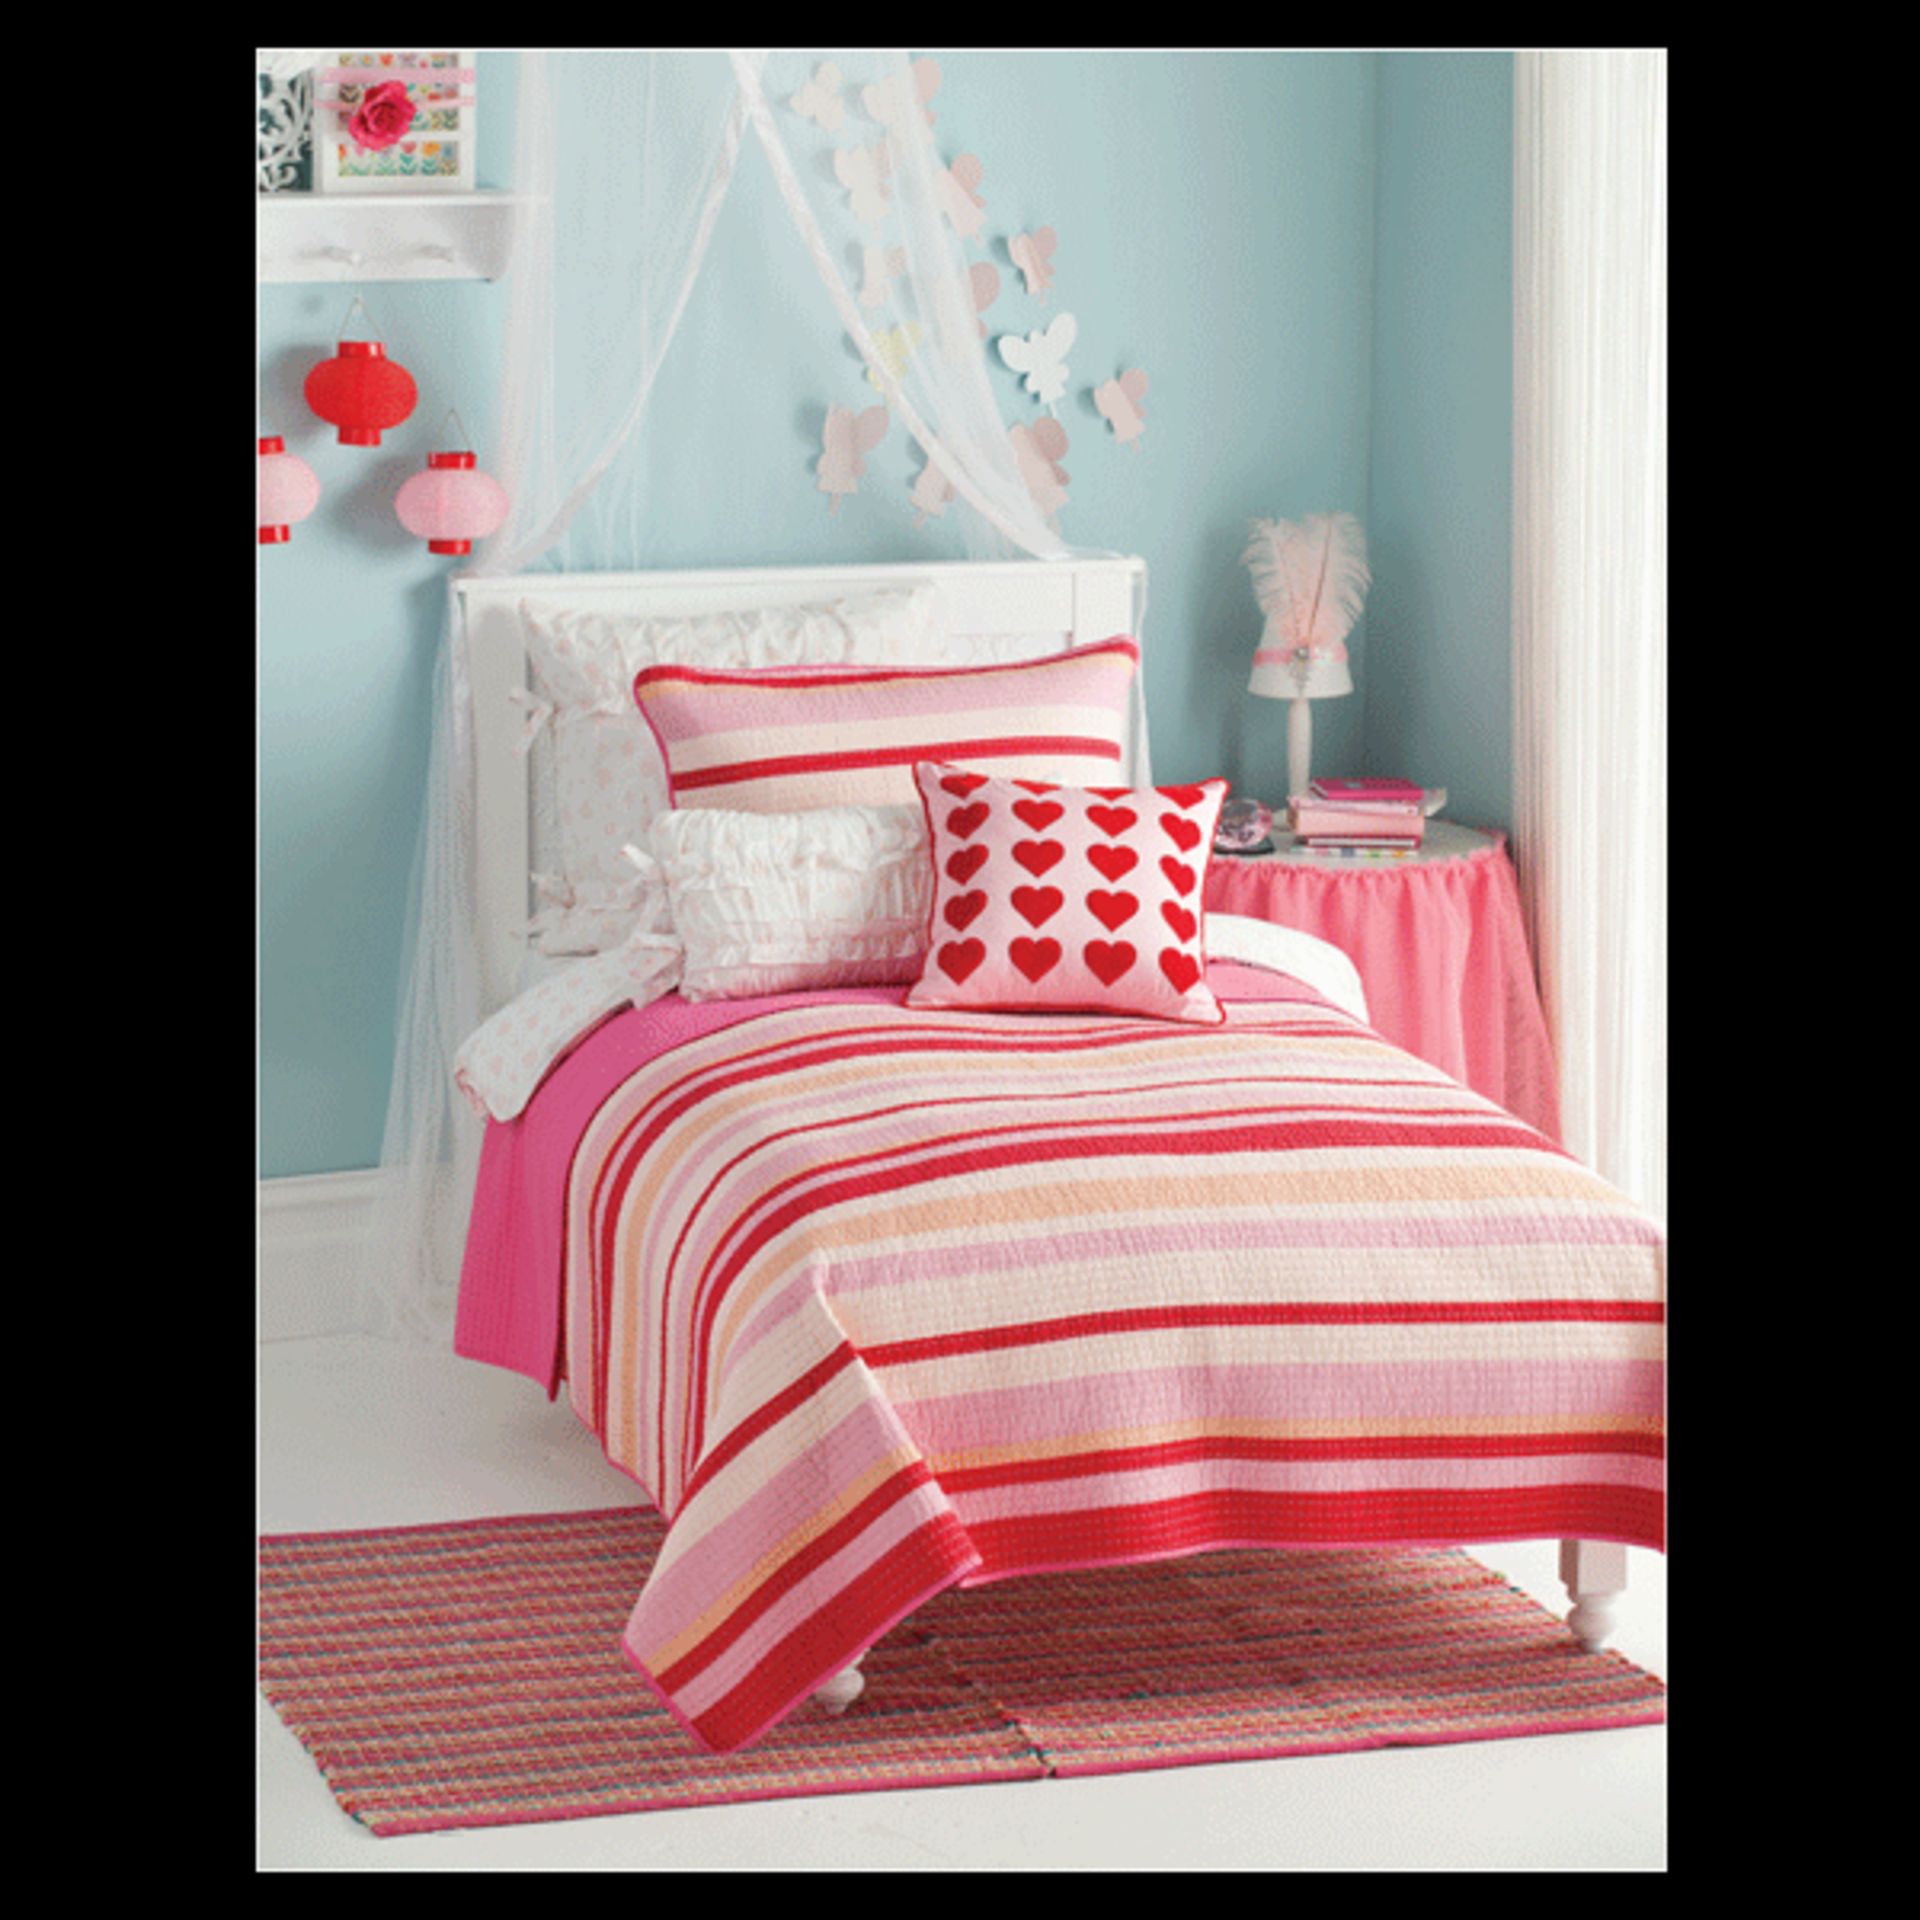 V Brand New Pink Striped Quilted Single Bedcover And Pillowcase Set X 2 YOUR BID PRICE TO BE